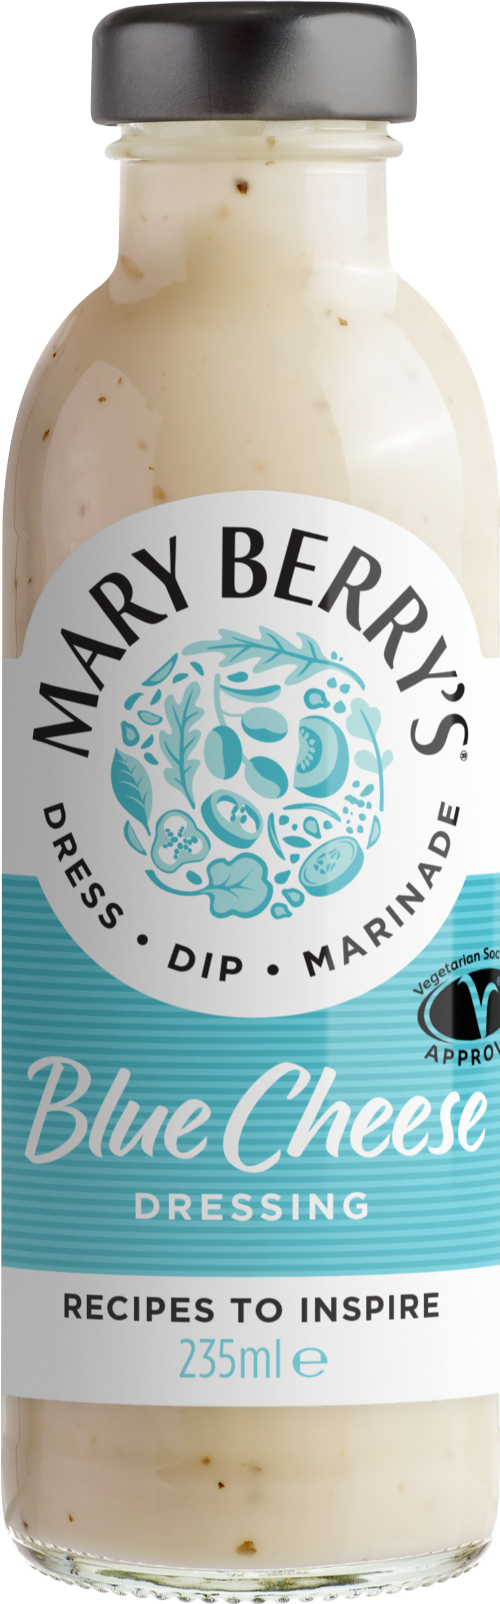 MARY BERRY Blue Cheese Dressing 235ml